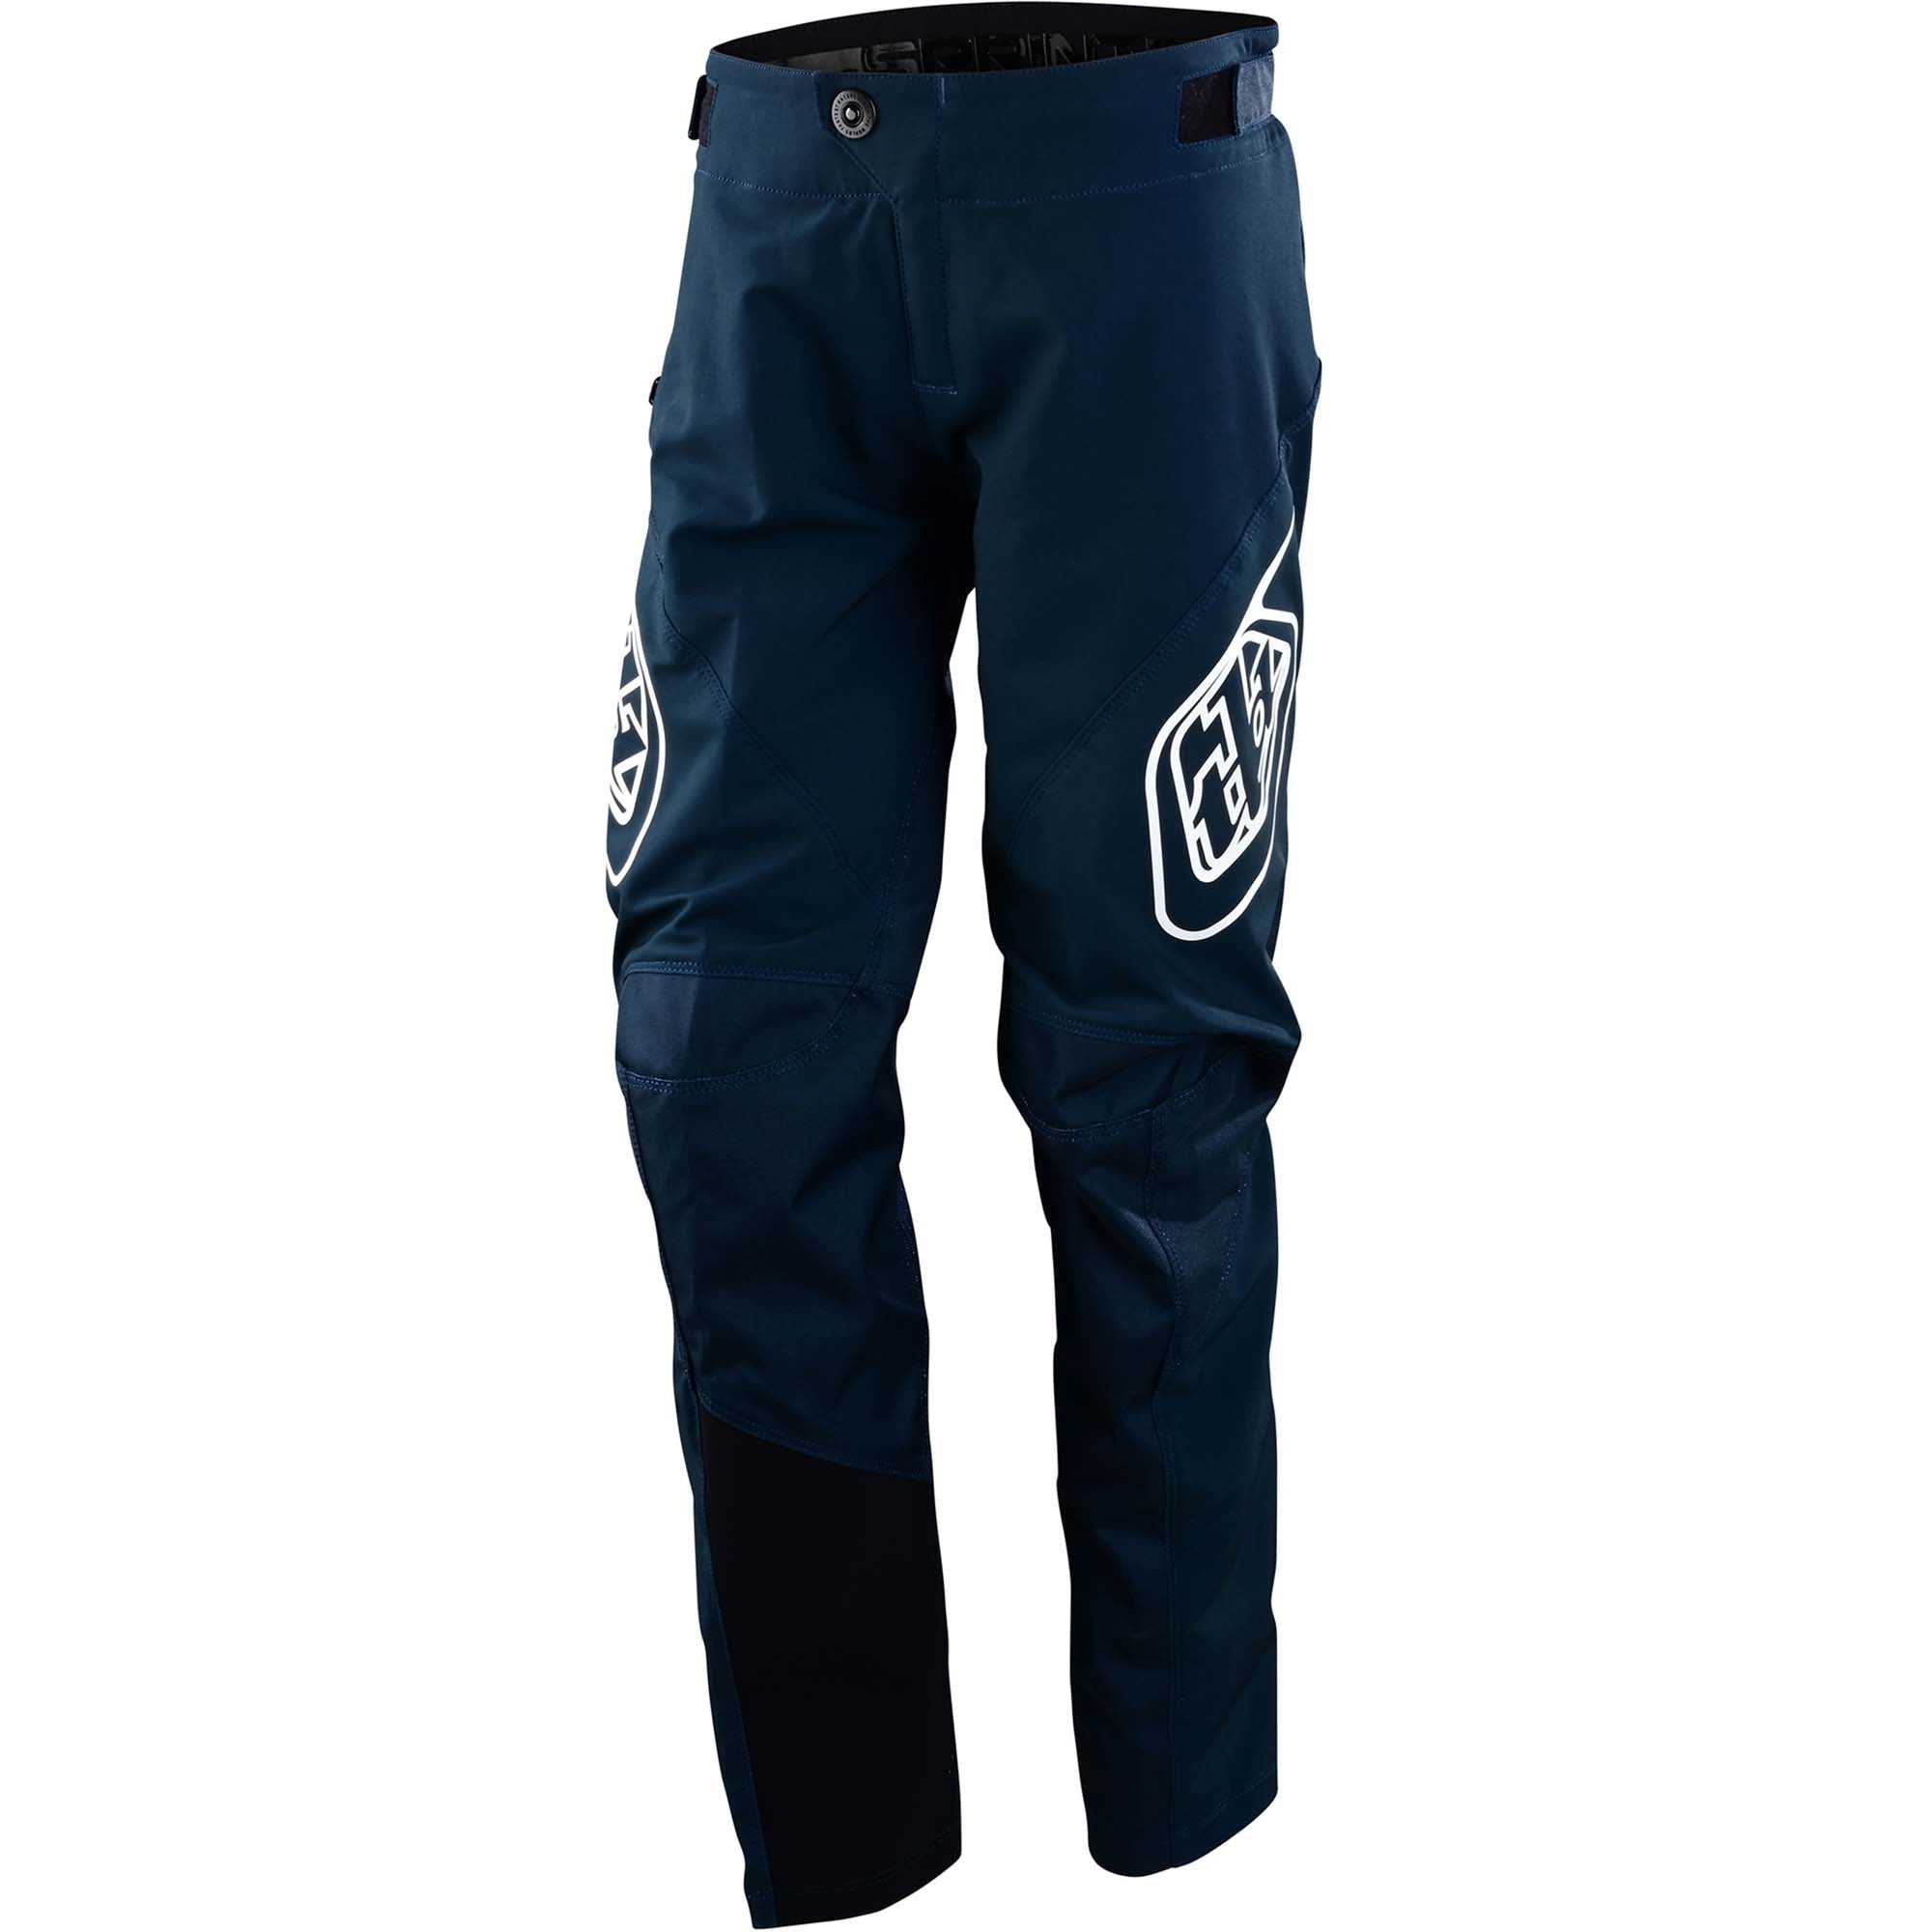 Troy Lee Designs Sprint Youth Pant